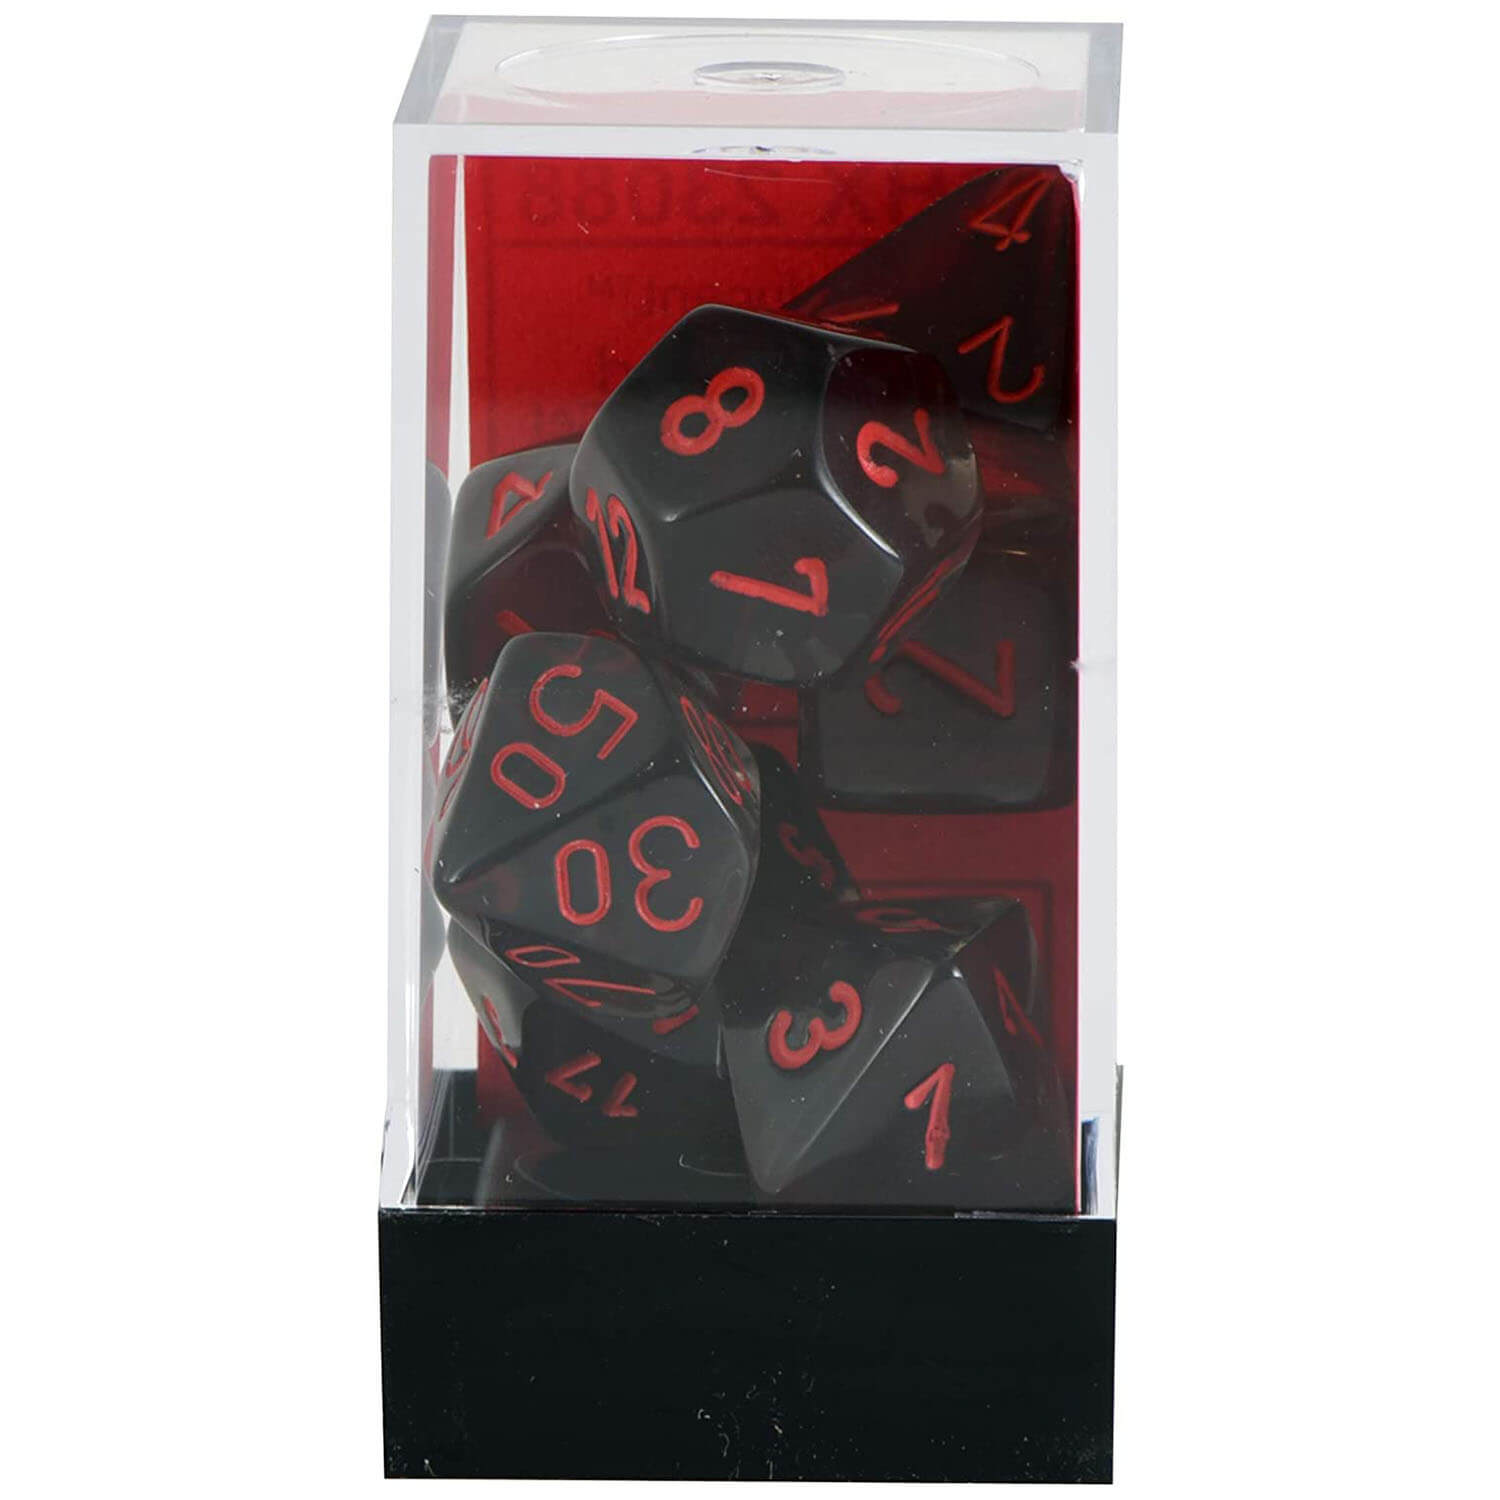 Front view of dice set packaging.